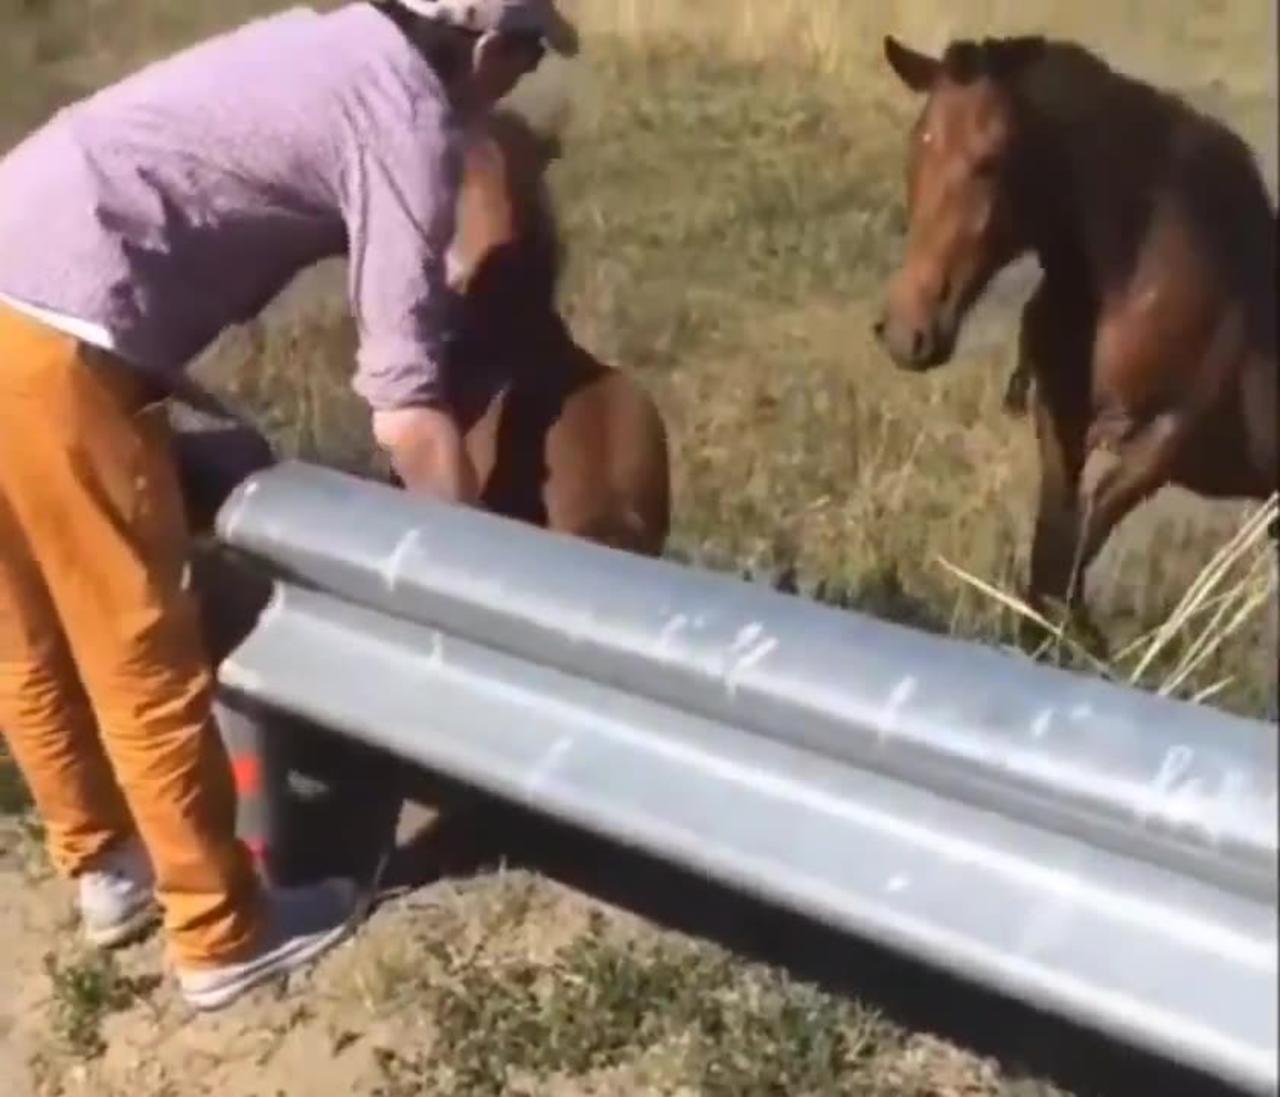 Good Guy helps a foal to get back to his family. ❤️